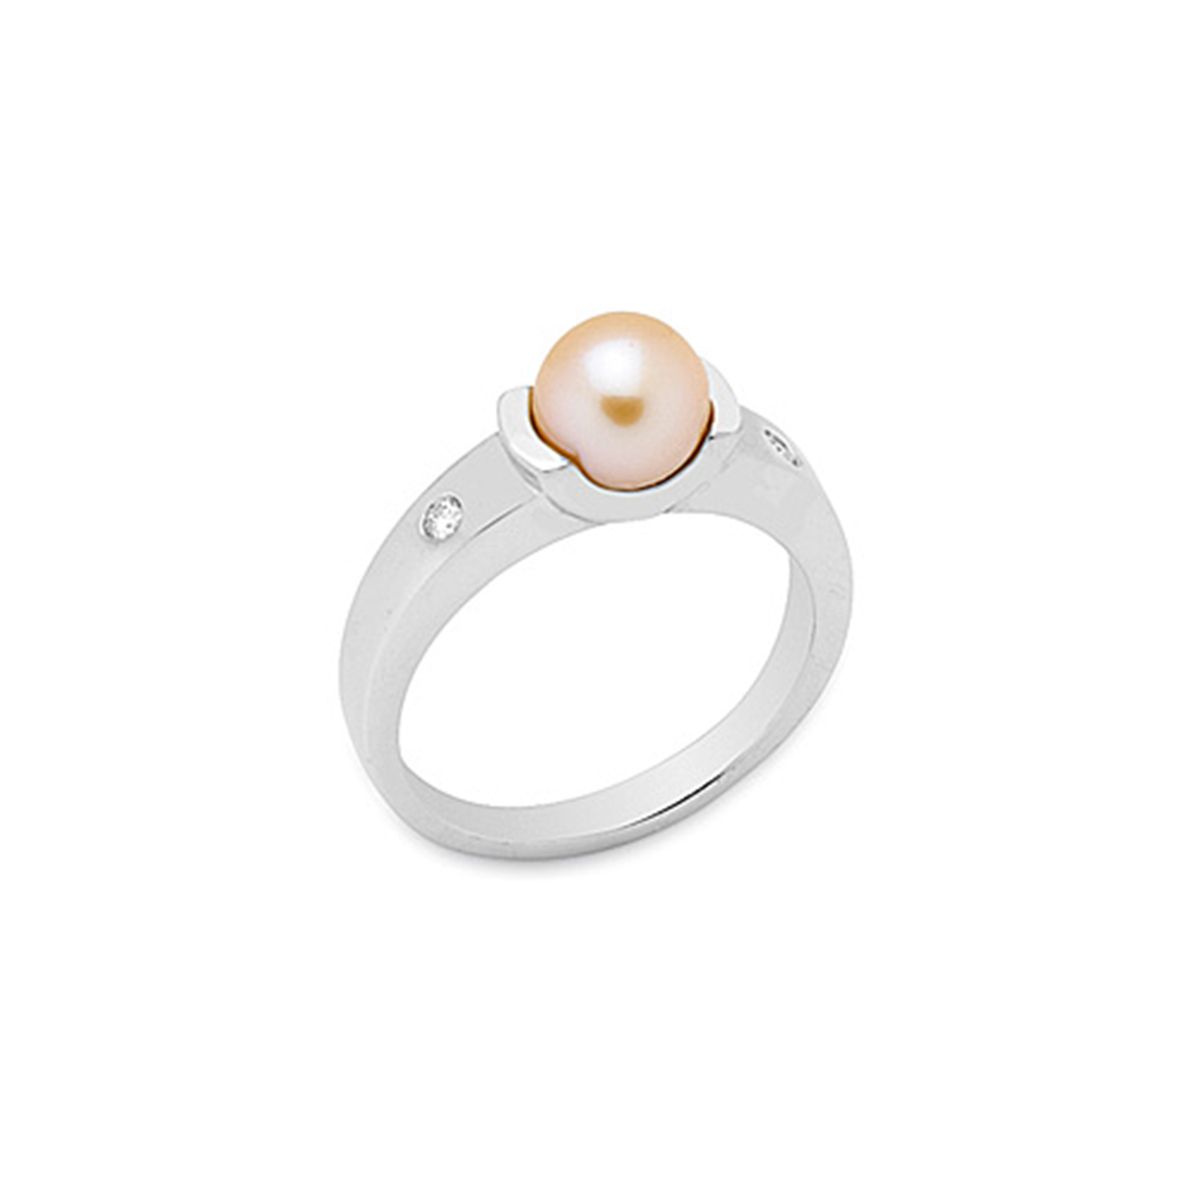 SRH Images_010_White Gold Pearl with Diamonds.jpg